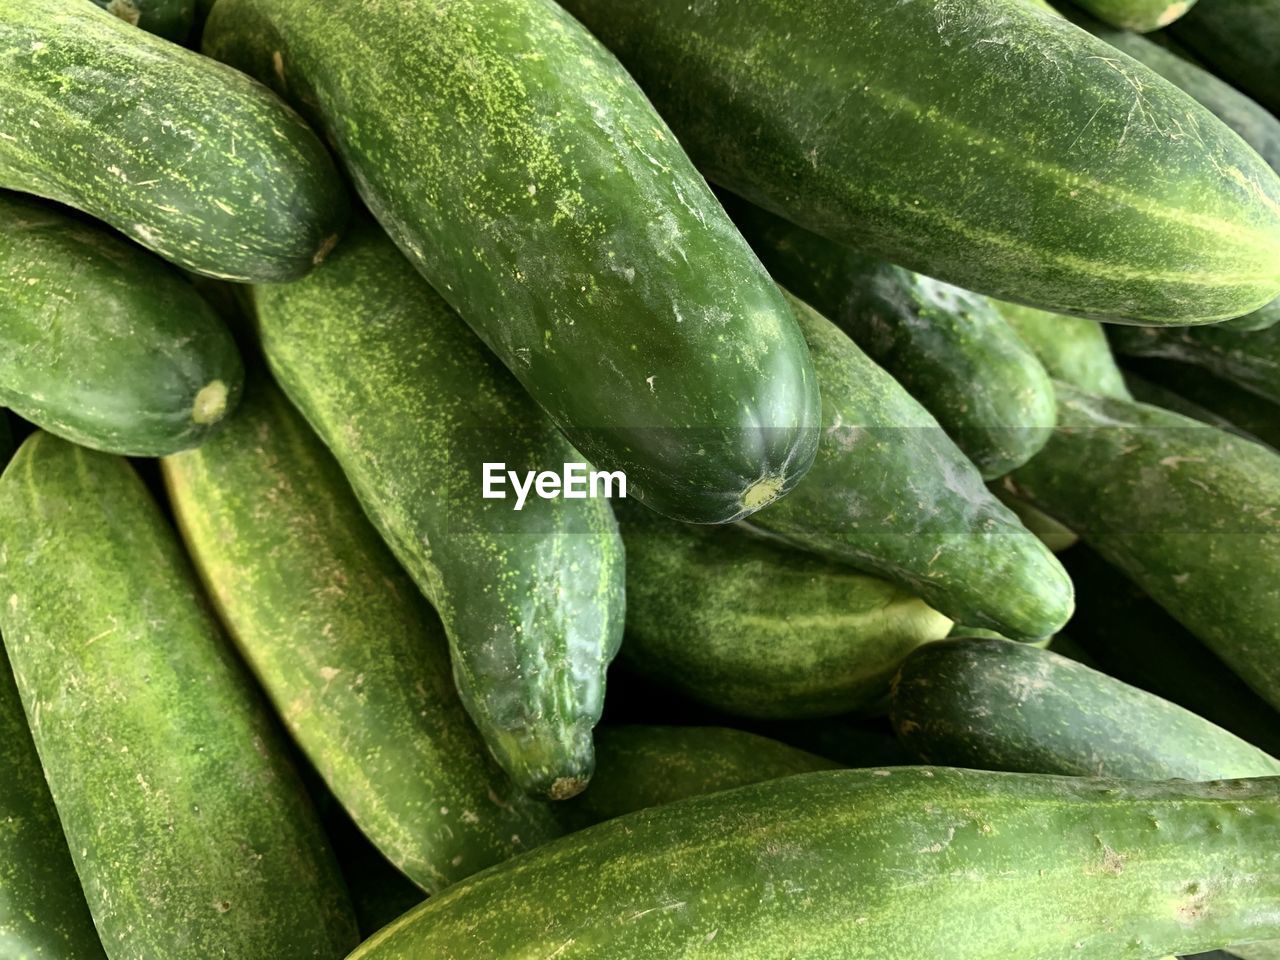 Group of green cucumber